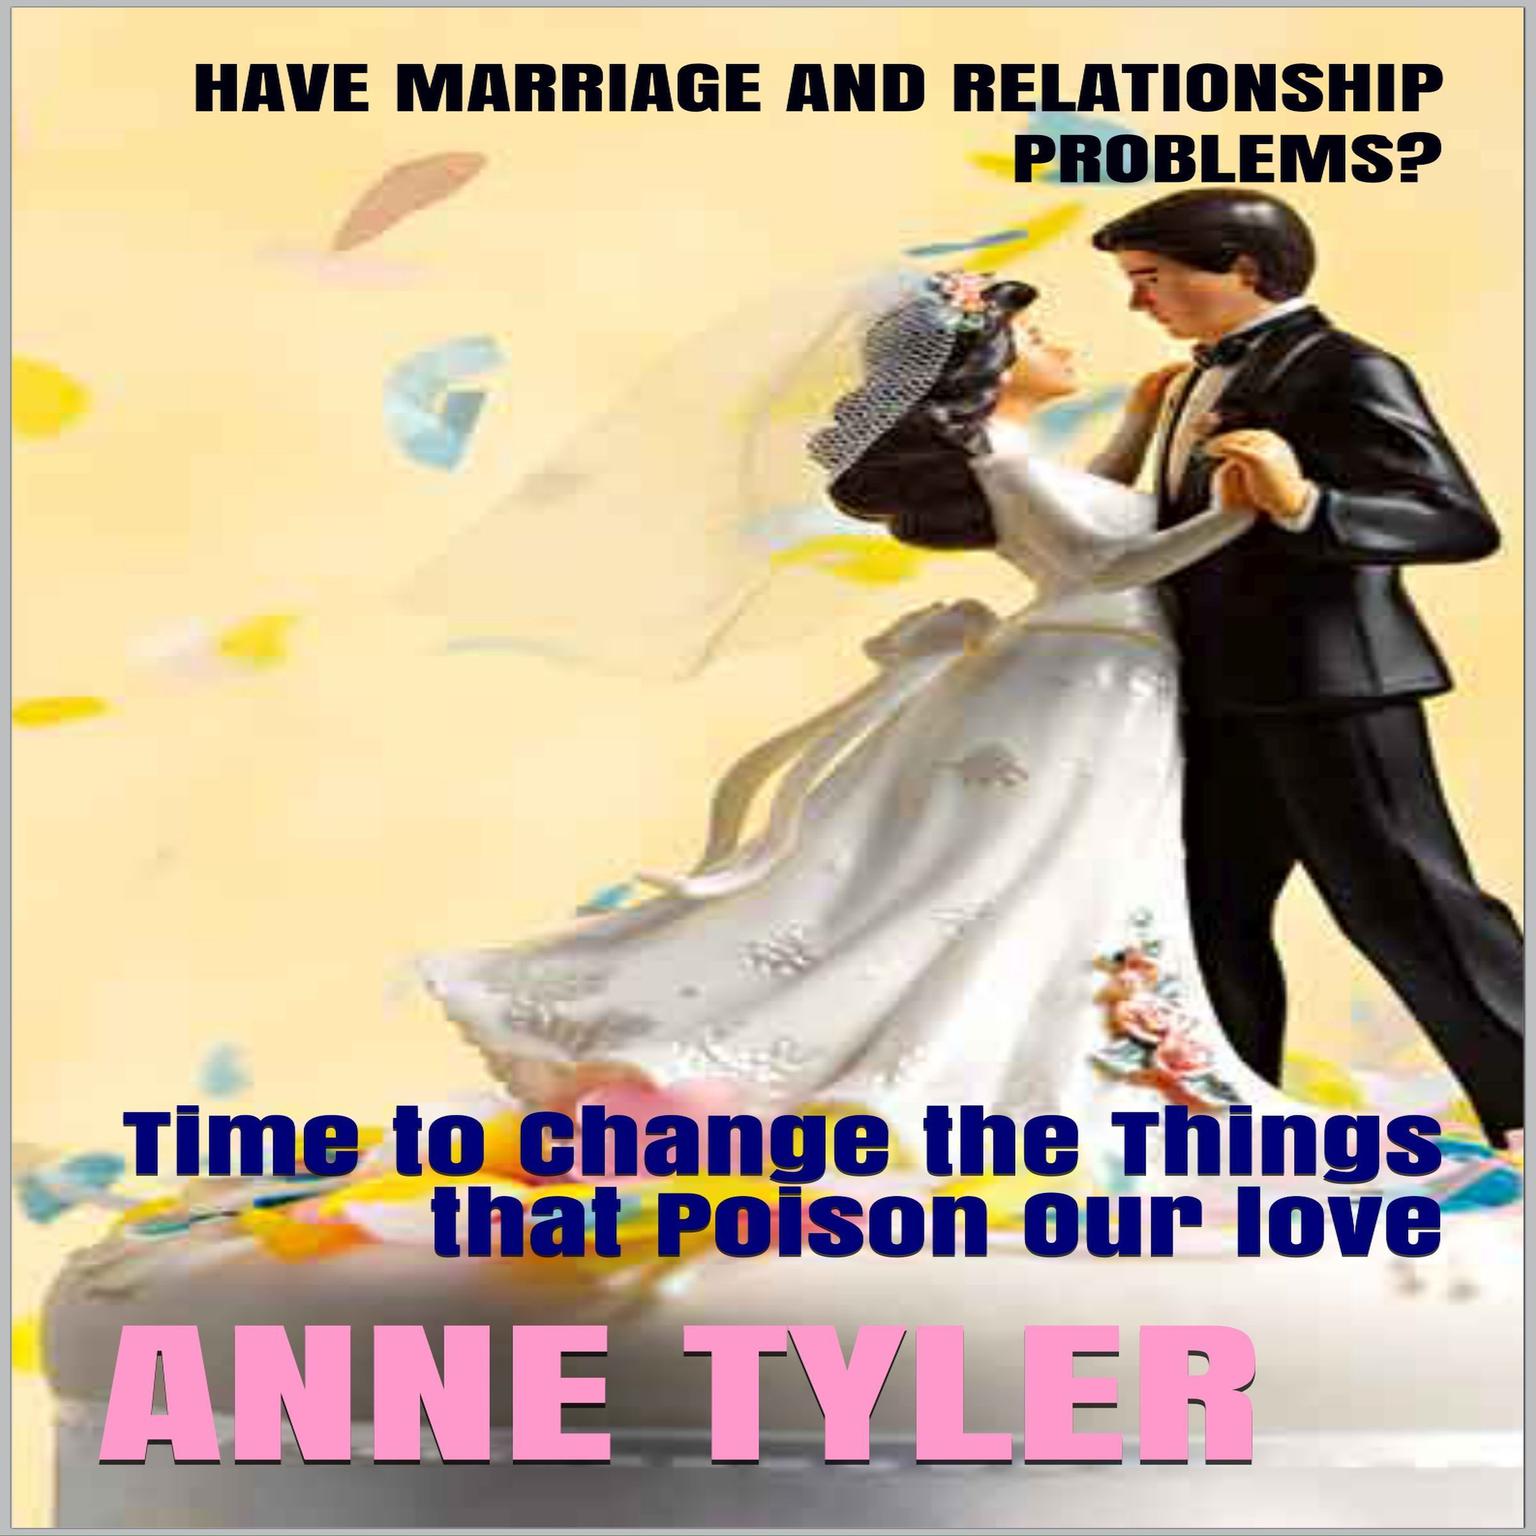 Have Marriage and Relationship Problems?: Time to Change the Things that Poison Our Love Audiobook, by Anne Tyler